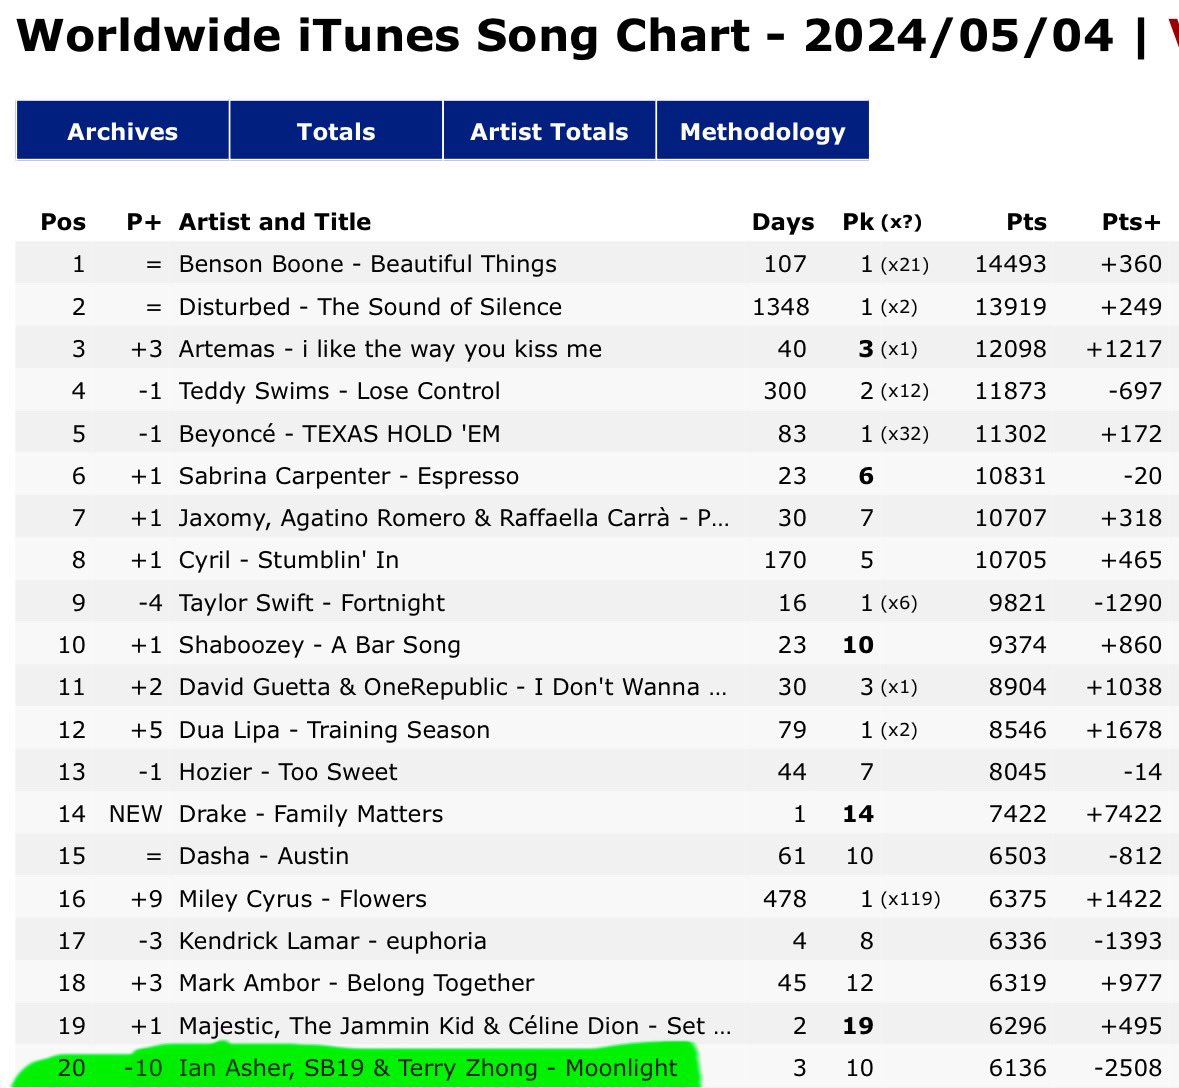 Moonlight by @SB19Official, Ian Asher and Terry Zhong is holding strong with Worldwide Itunes Chart and currently charting at #20. Still an impressive feat on the 3rd day of tracking. This is a good sign of potential billboard charting! #SB19